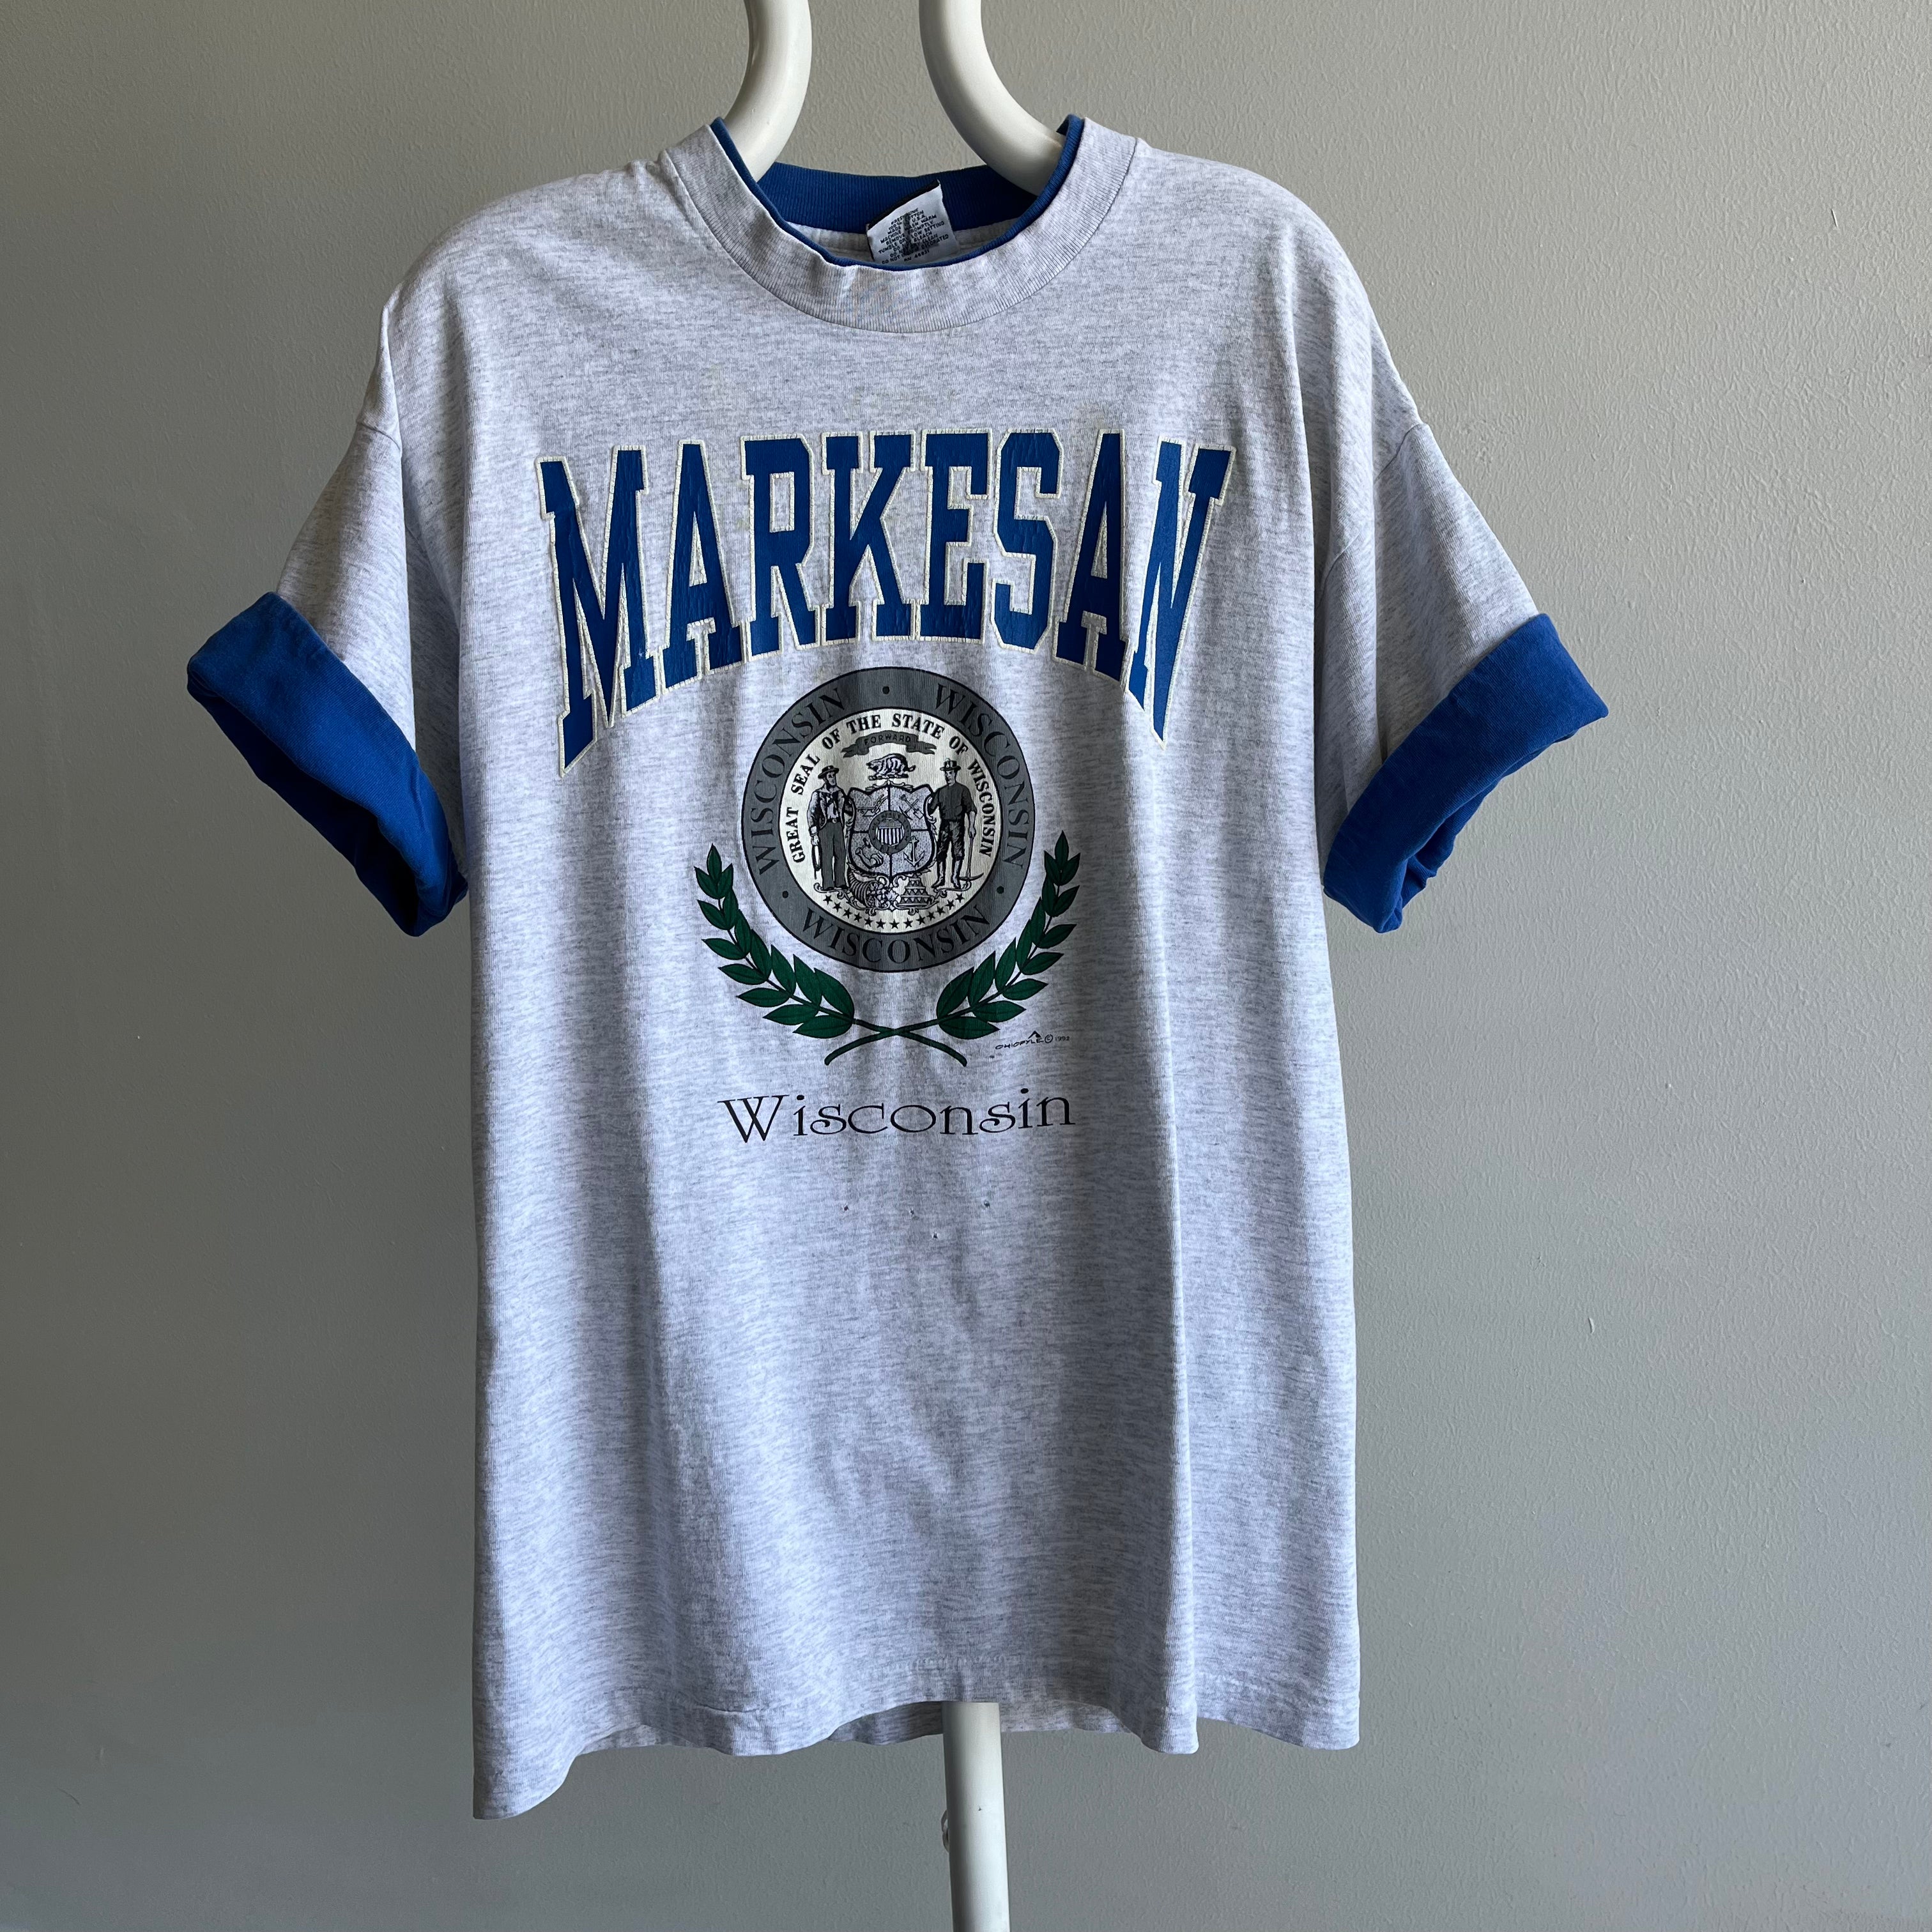 1980s Markensan Wisconsin Two Toned T-Shirt